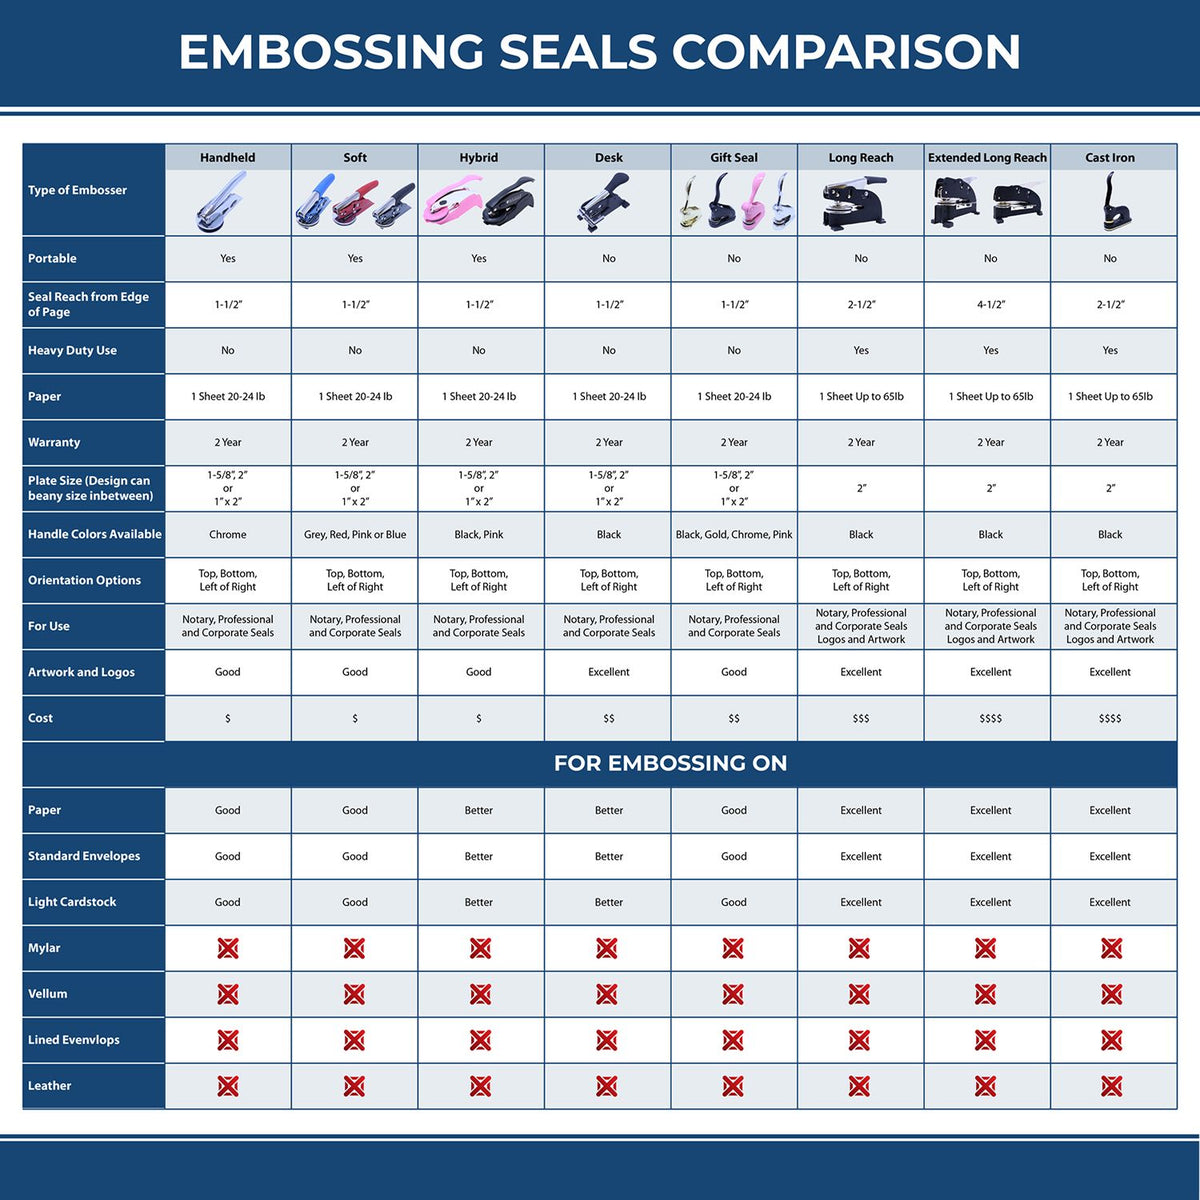 A comparison chart for the different types of mount models available for the Handheld Arkansas Professional Geologist Embosser